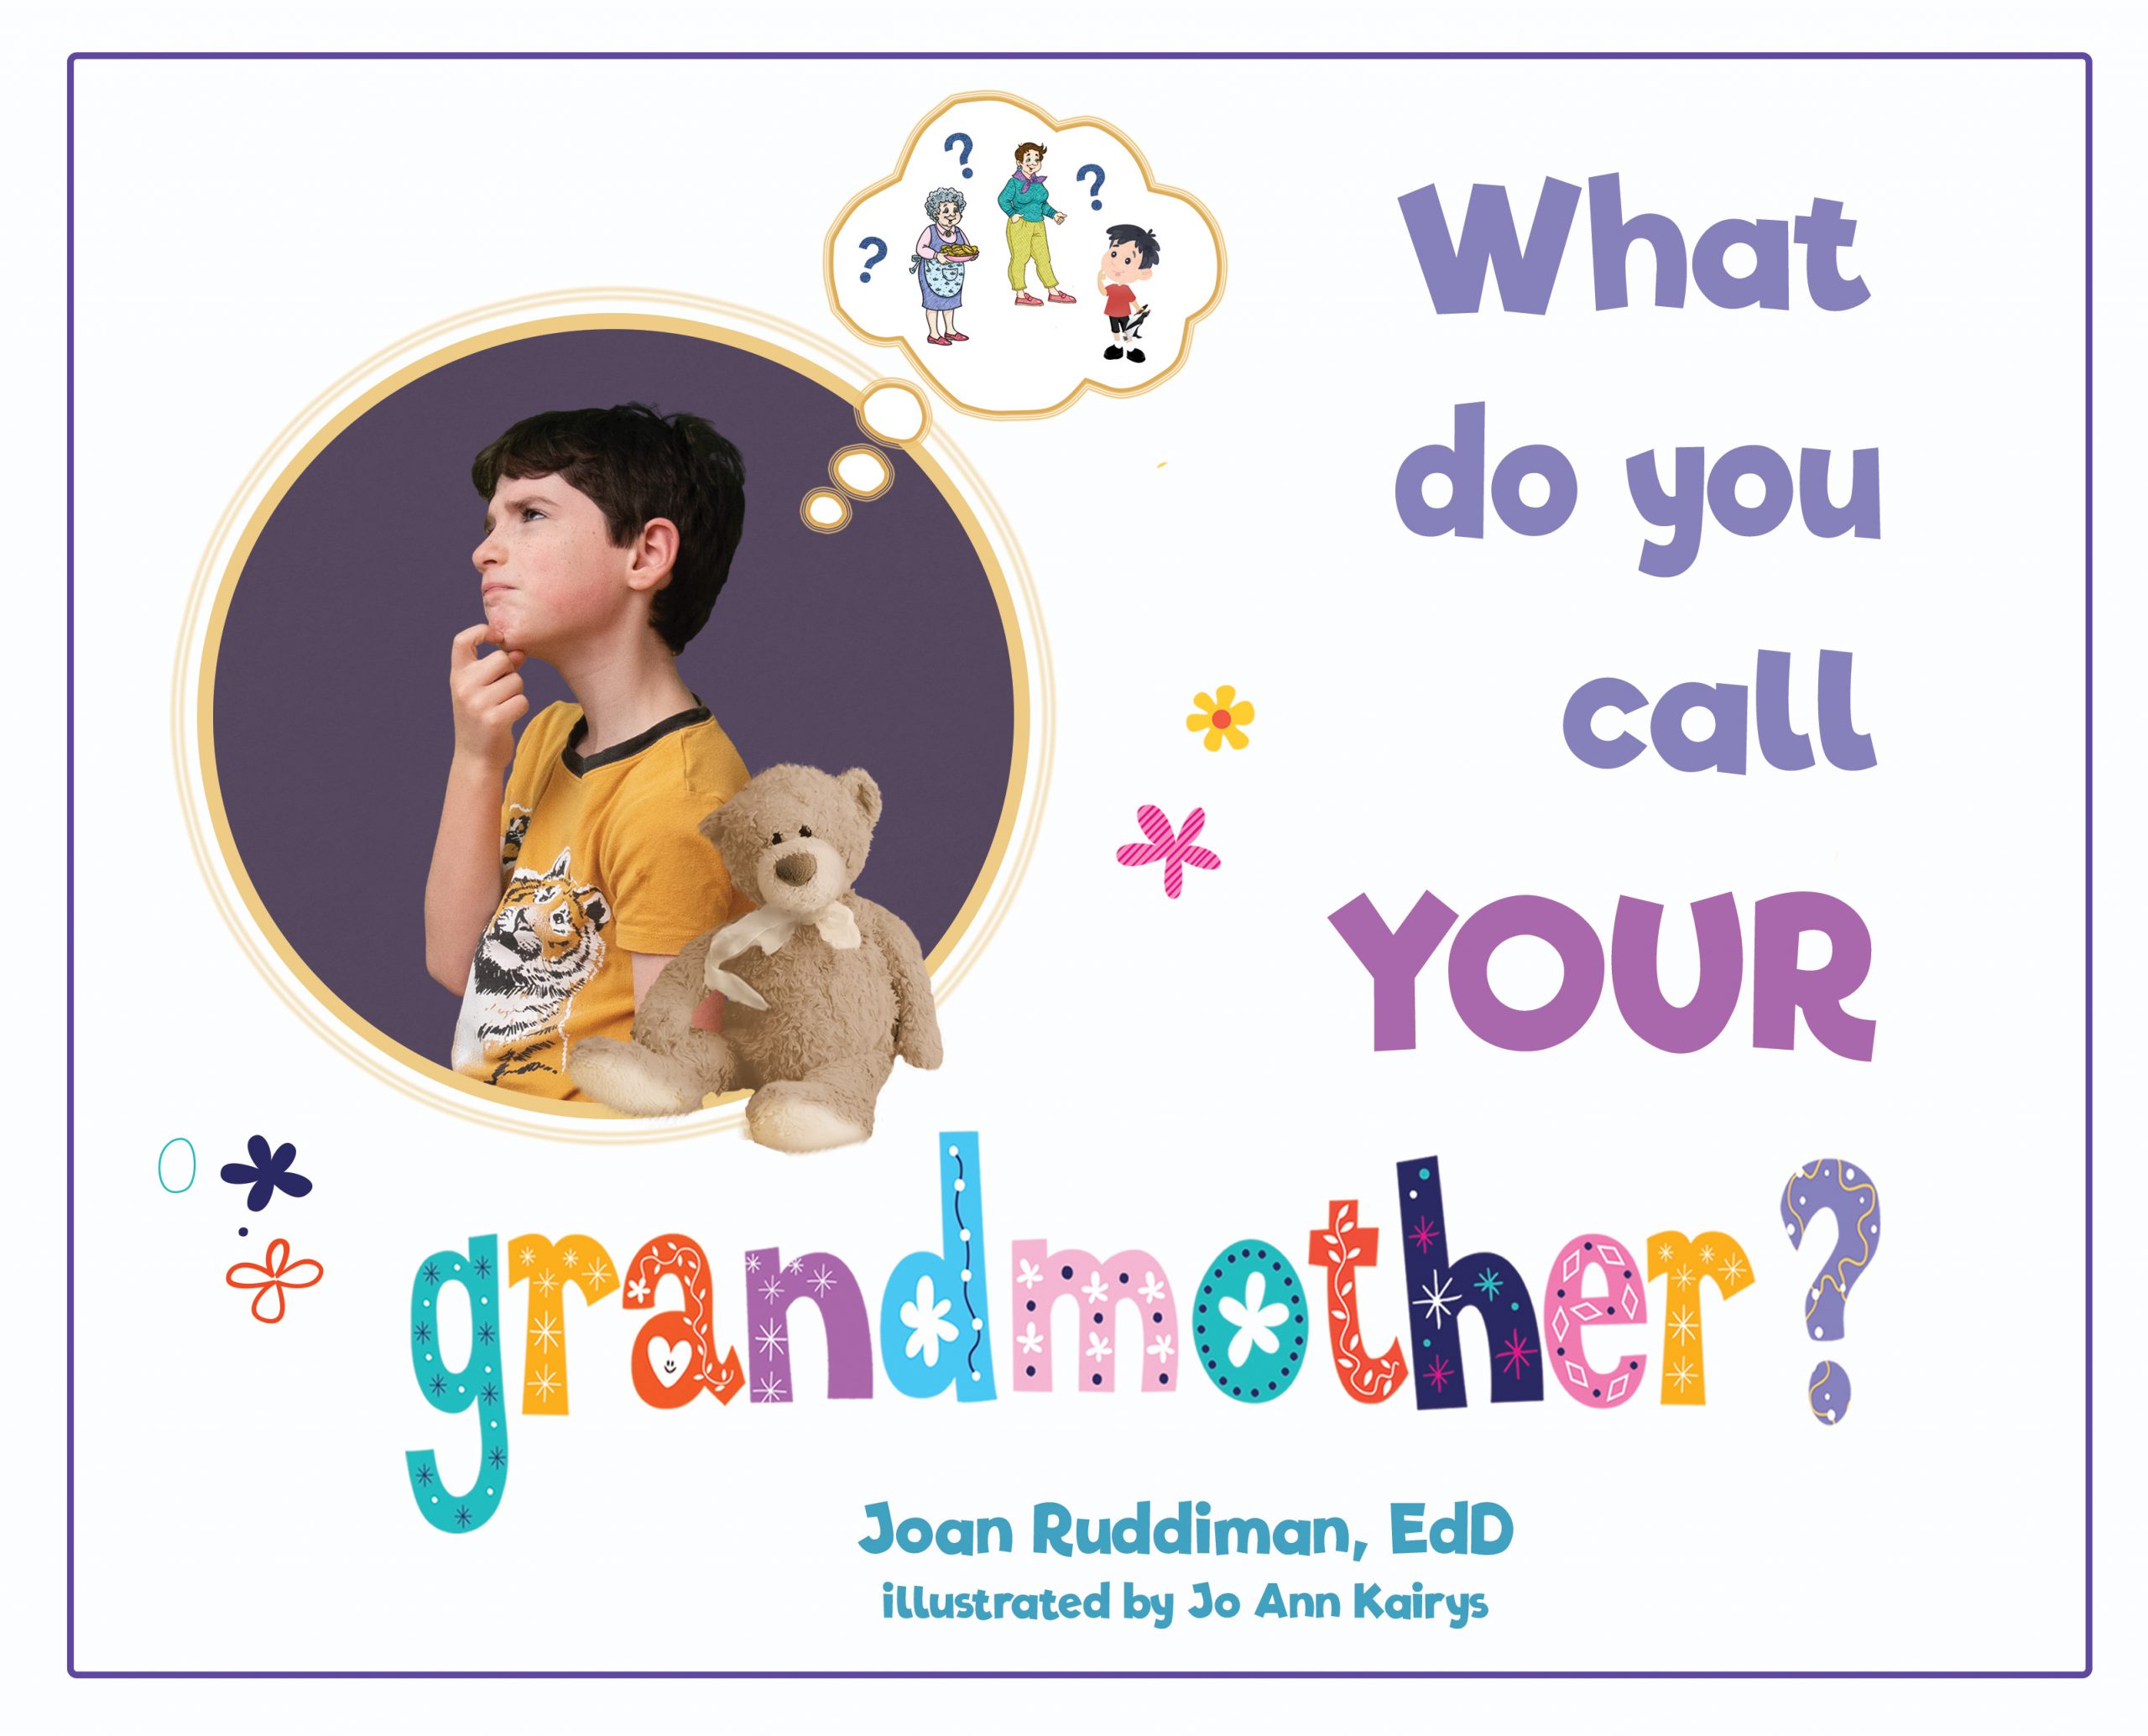 The cover of the Mom's Choice Award-winning book, What Do You Call YOUR Grandmother?